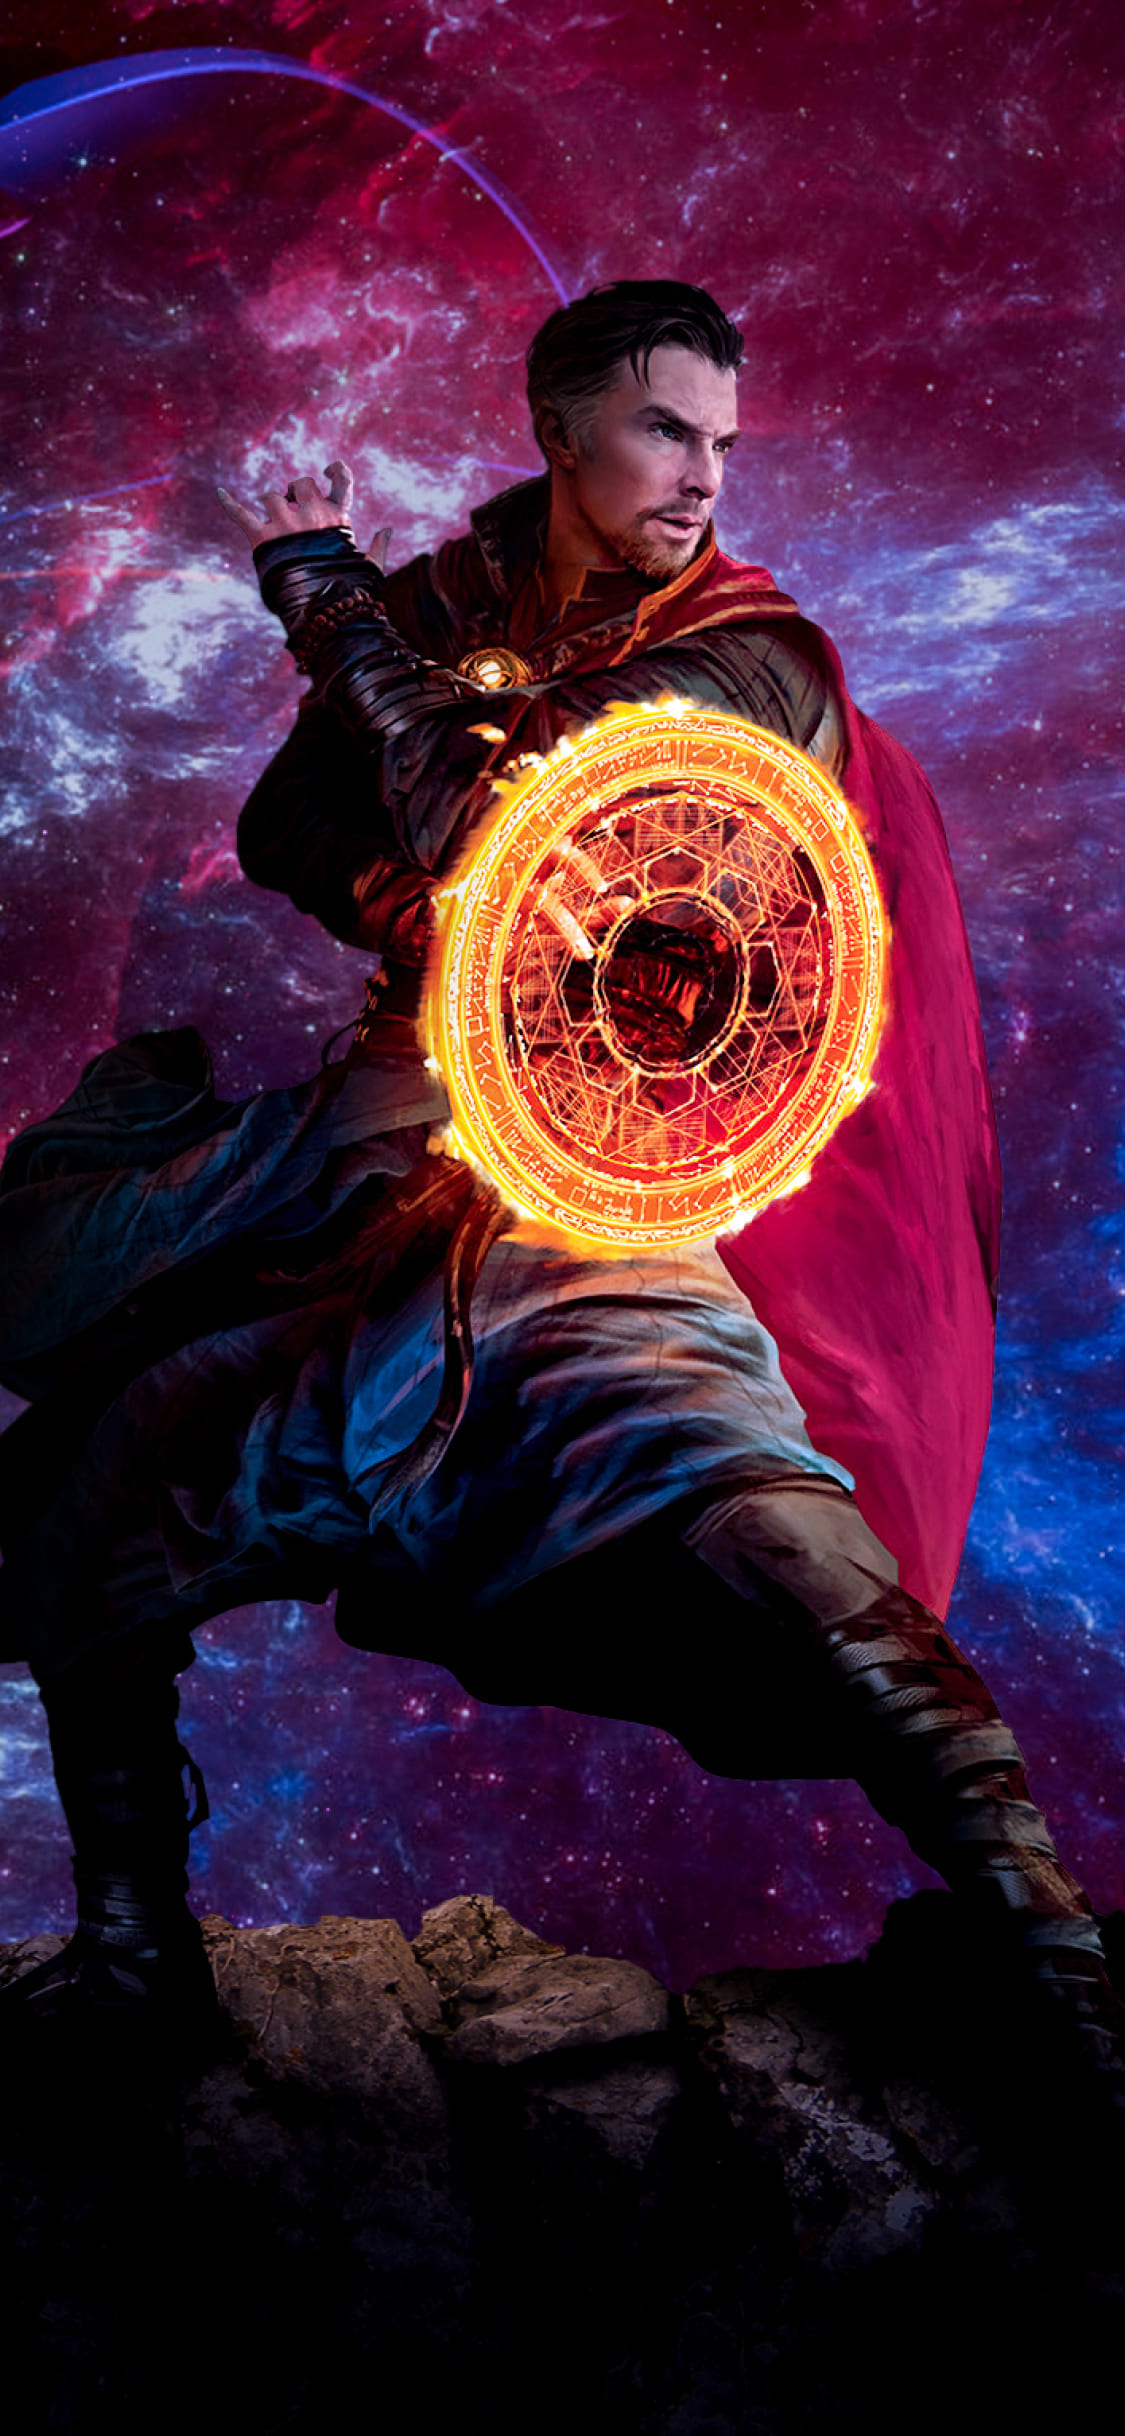 Doctor Strange in the Multiverse of Madness Poster Wallpaper 4K HD PC 4351g